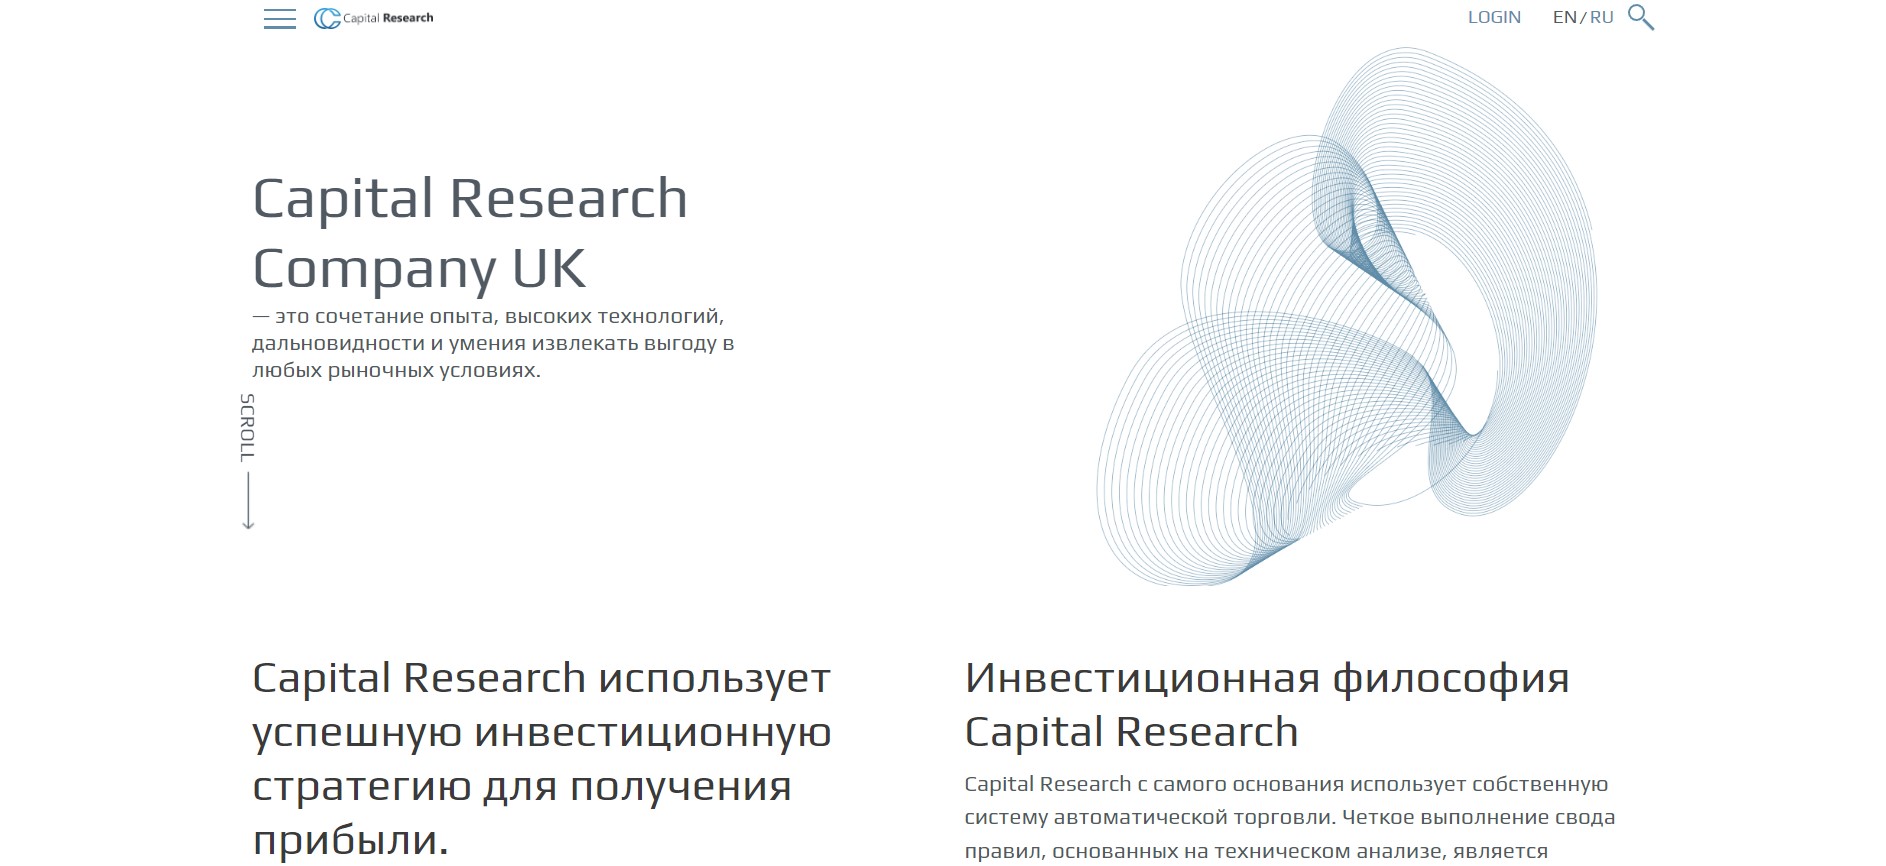 Capital Research